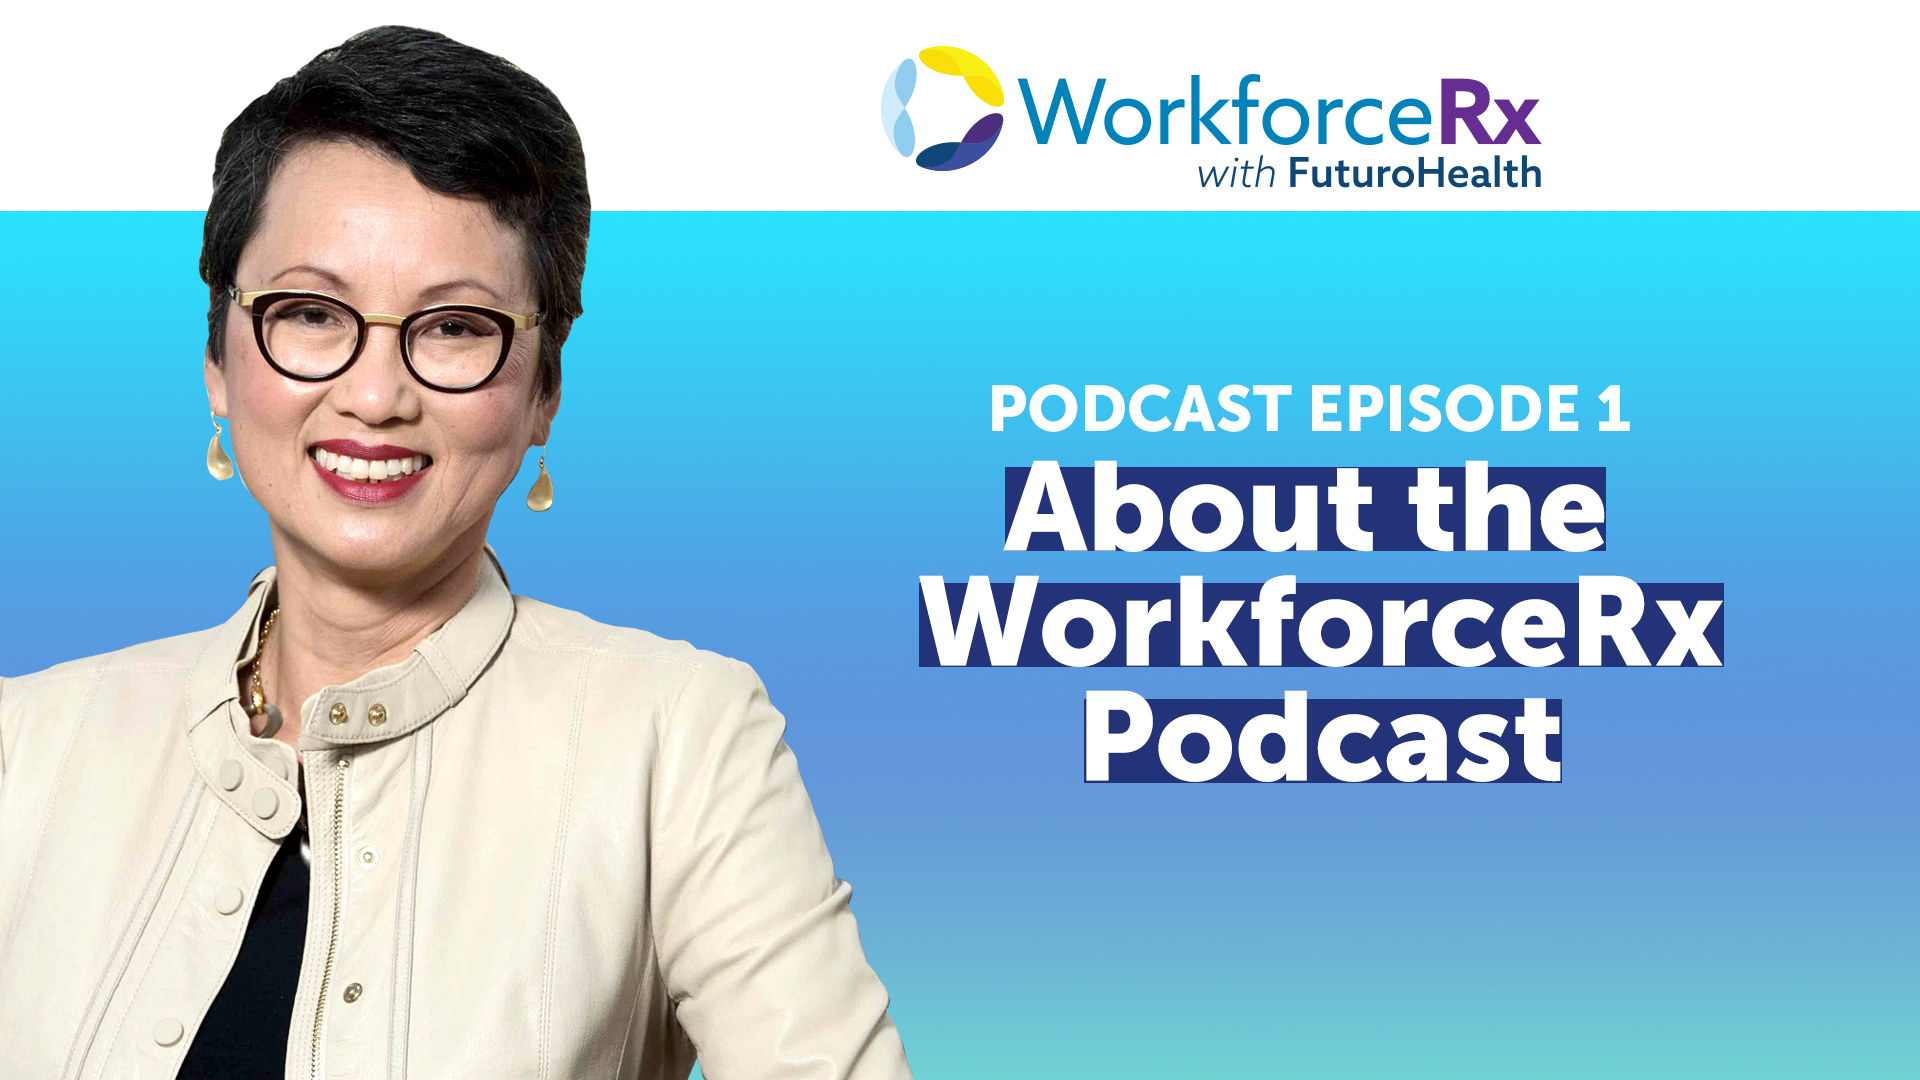 About the WorkforceRx Podcast